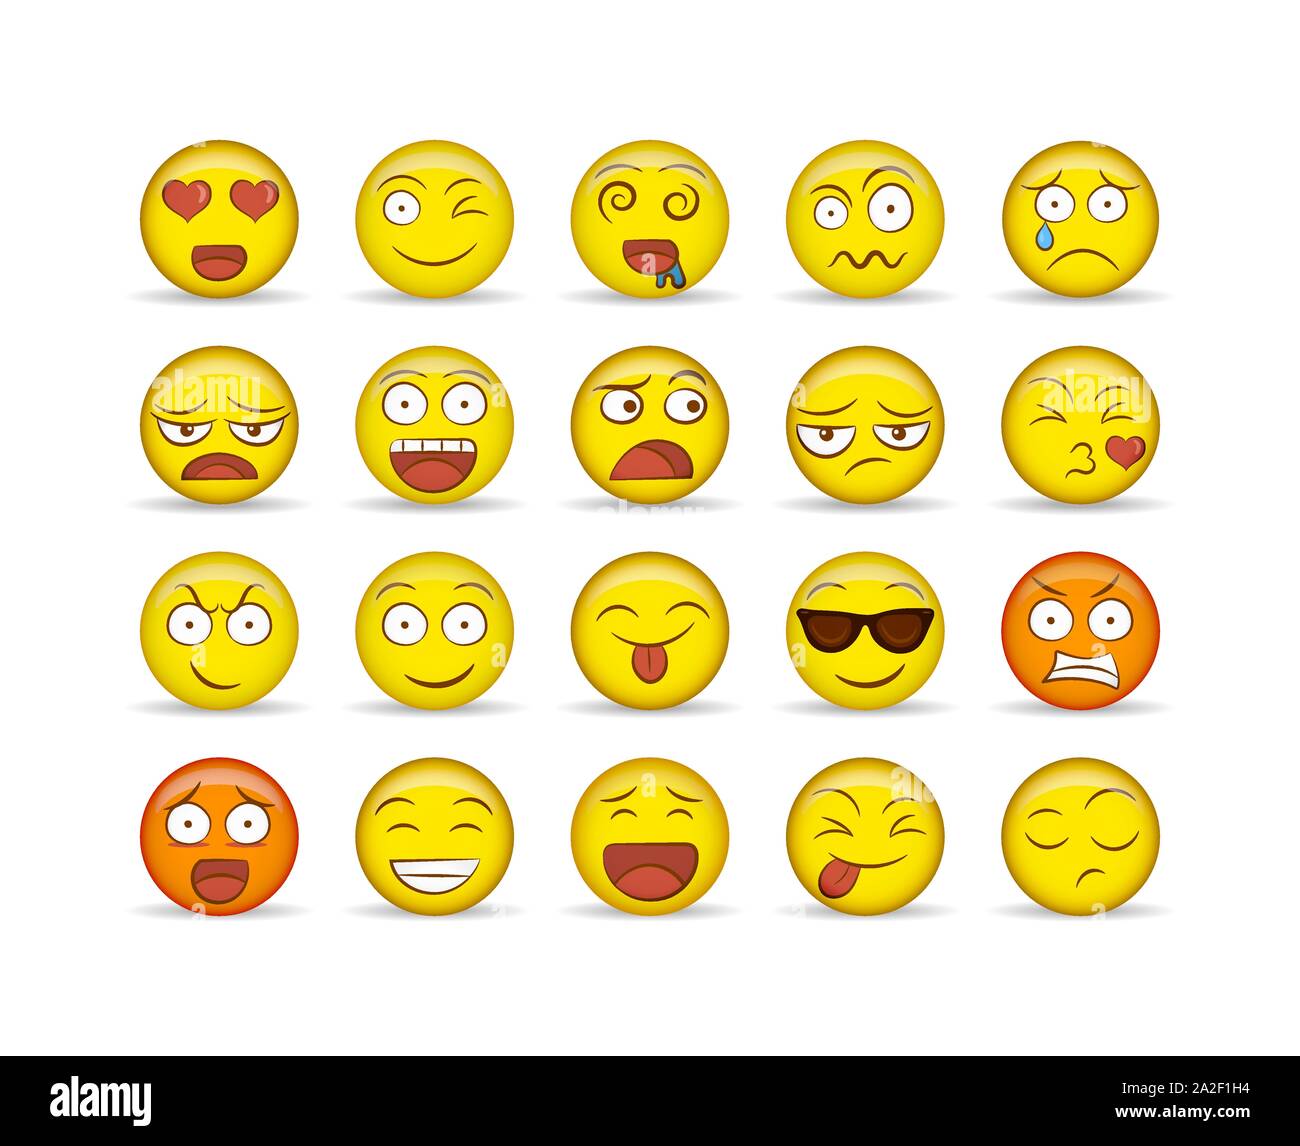 Fun yellow smiley face icon set on isolated white background. Diverse social reaction collection for modern teen or children communication concept. Stock Vector